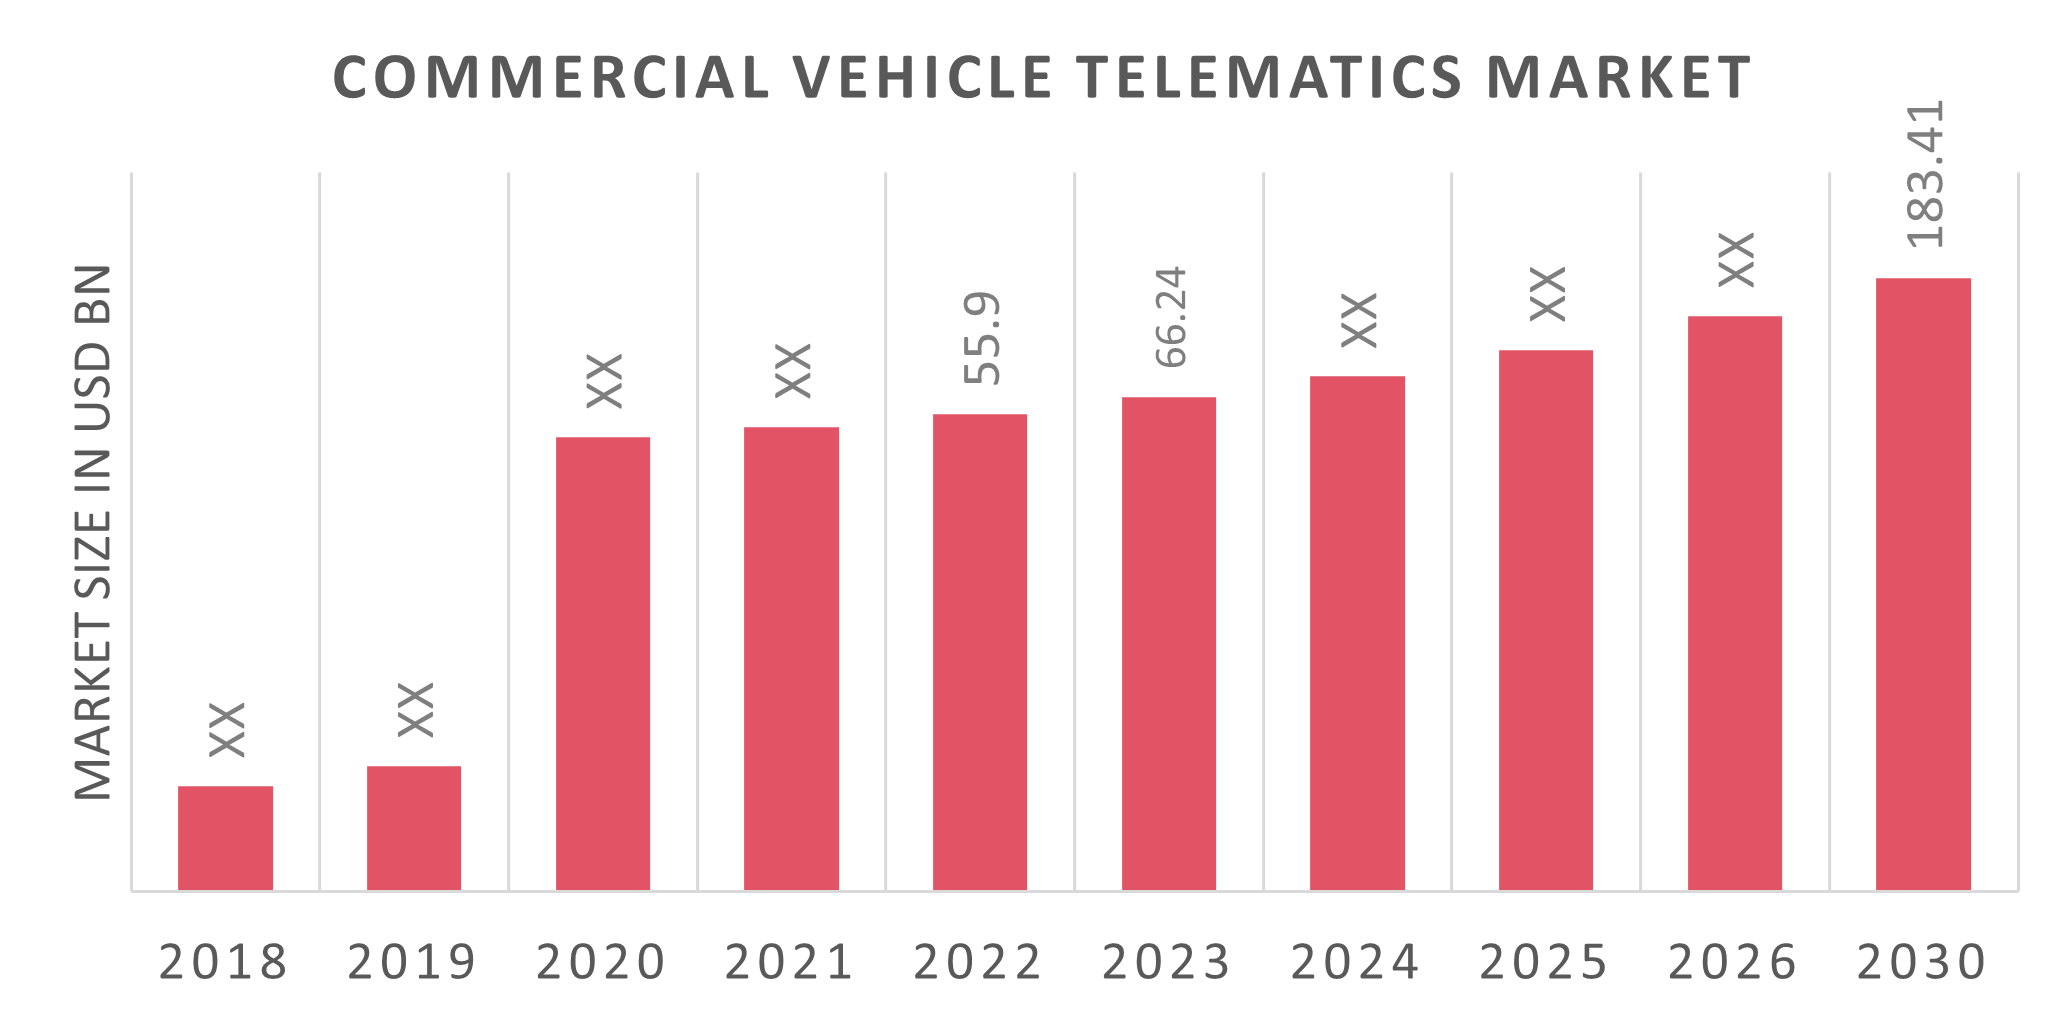 Global Commercial Vehicle Telematics Market Overview